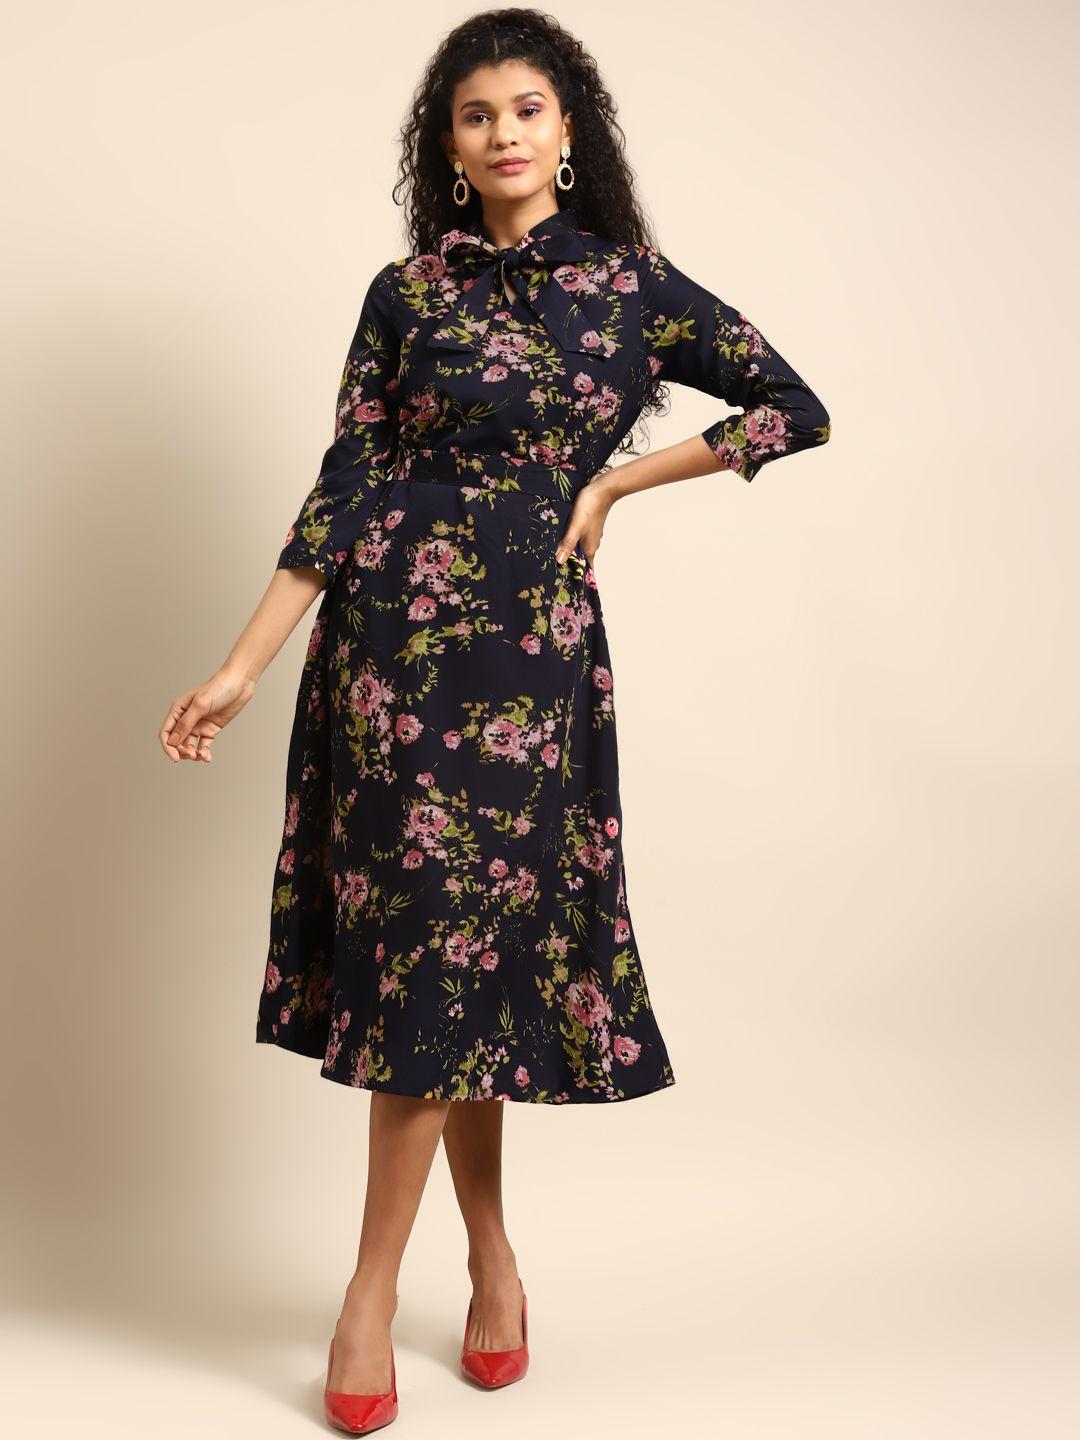 dodo & moa women navy blue & pink floral printed a-line dress